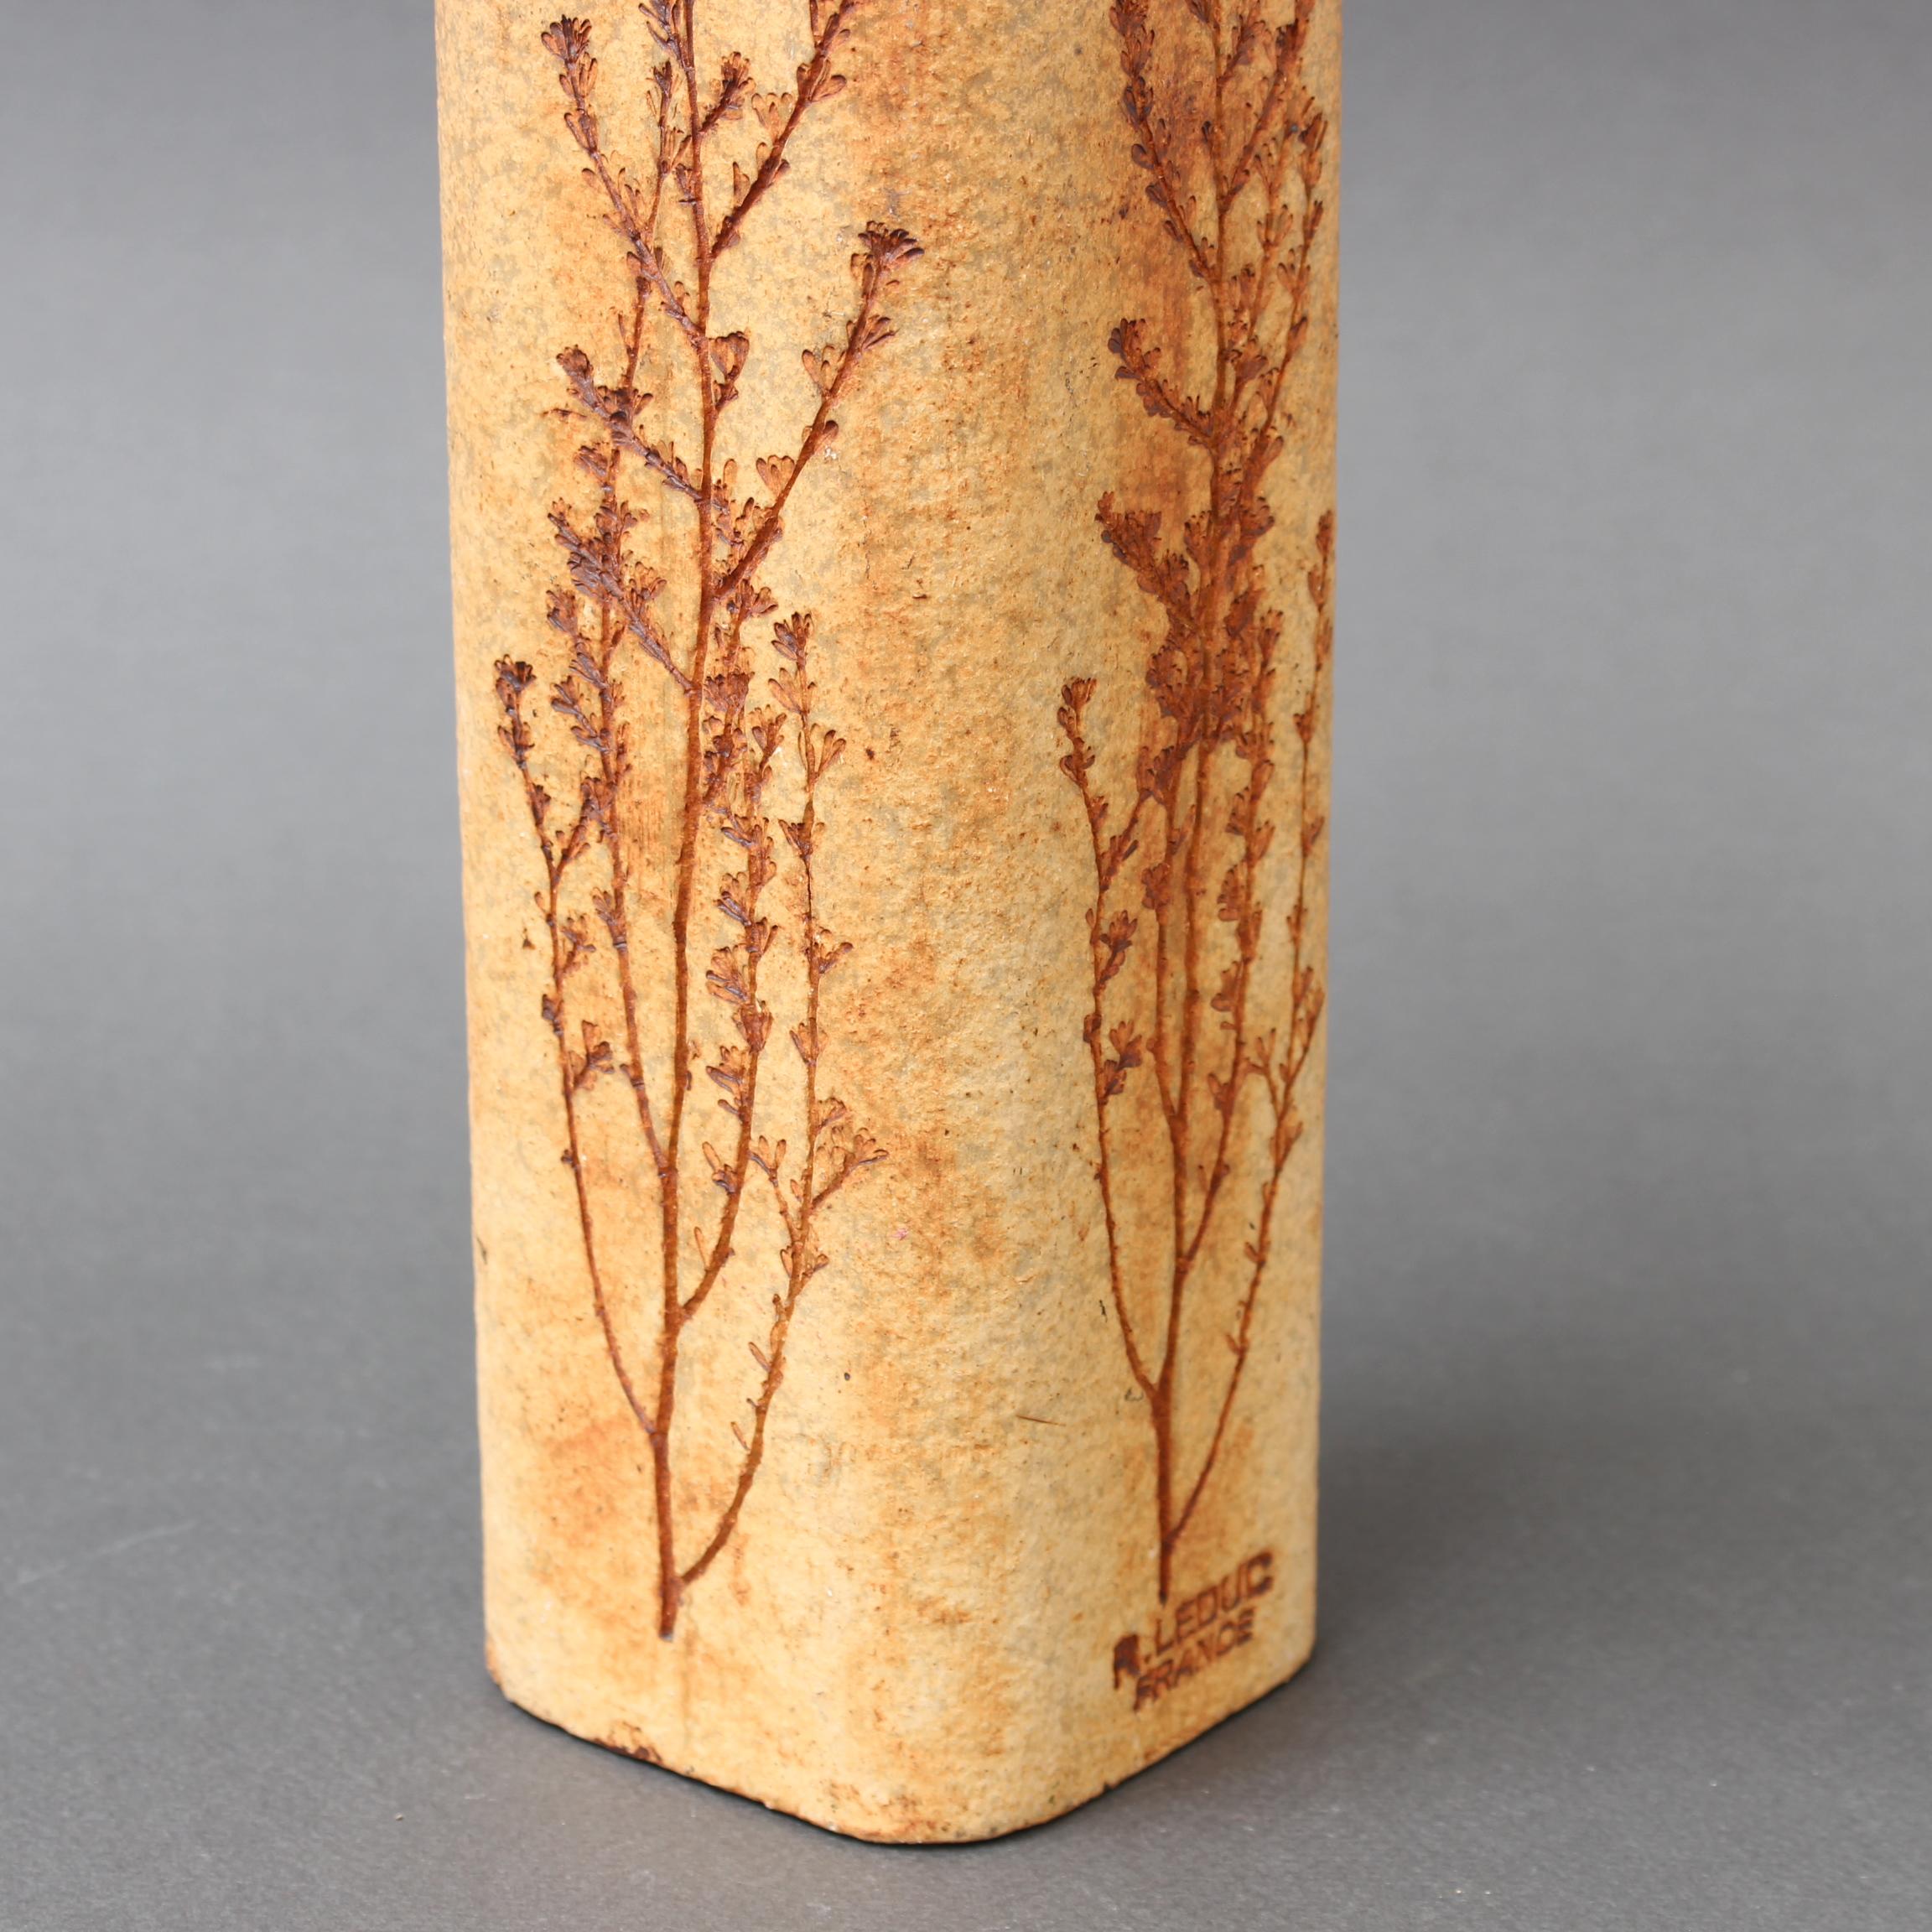 Vintage French Ceramic Vase with Plant Motif by Raymonde Leduc (circa 1960s) For Sale 3